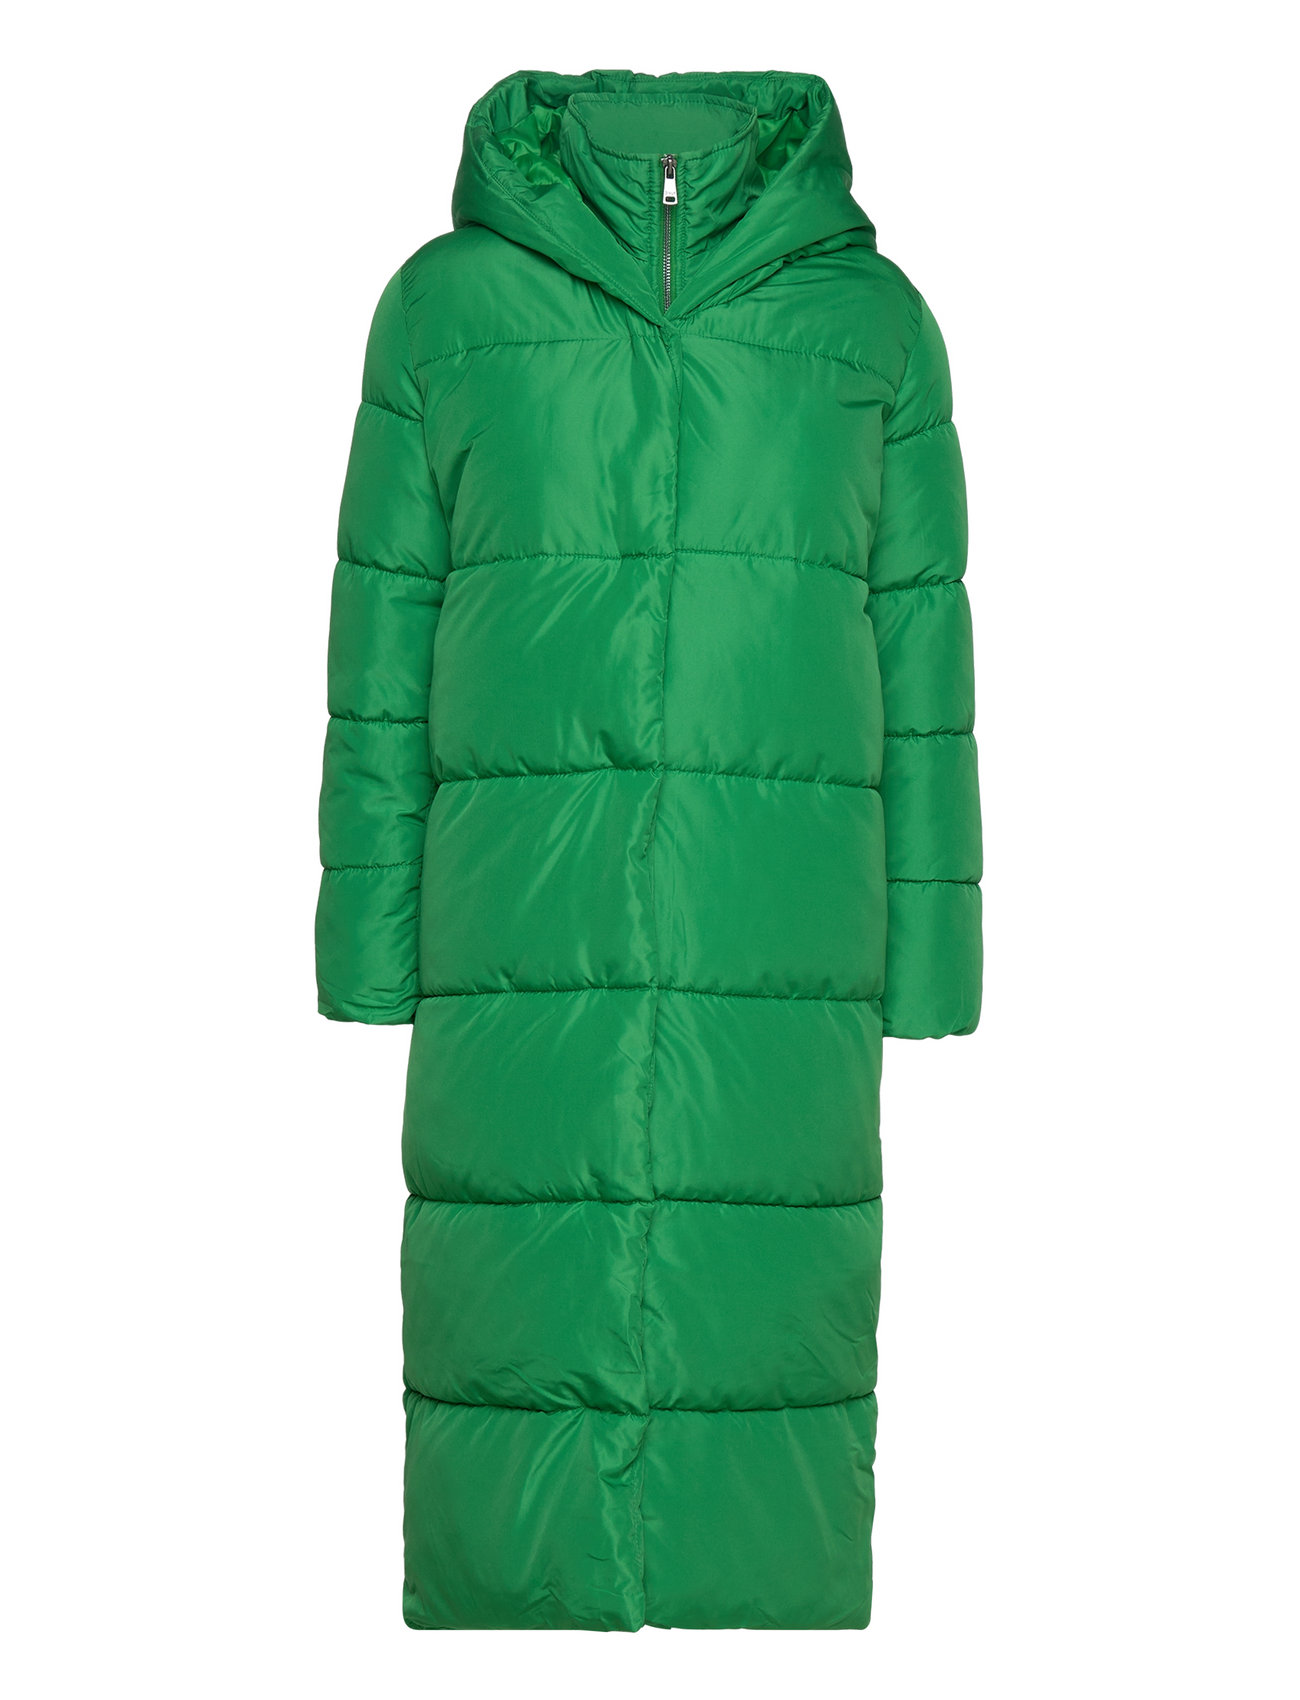 ONLY Onlamy X Long Puffer Coat Otw - 89.99 €. Buy Padded Coats from ONLY  online at Boozt.com. Fast delivery and easy returns | Mäntel